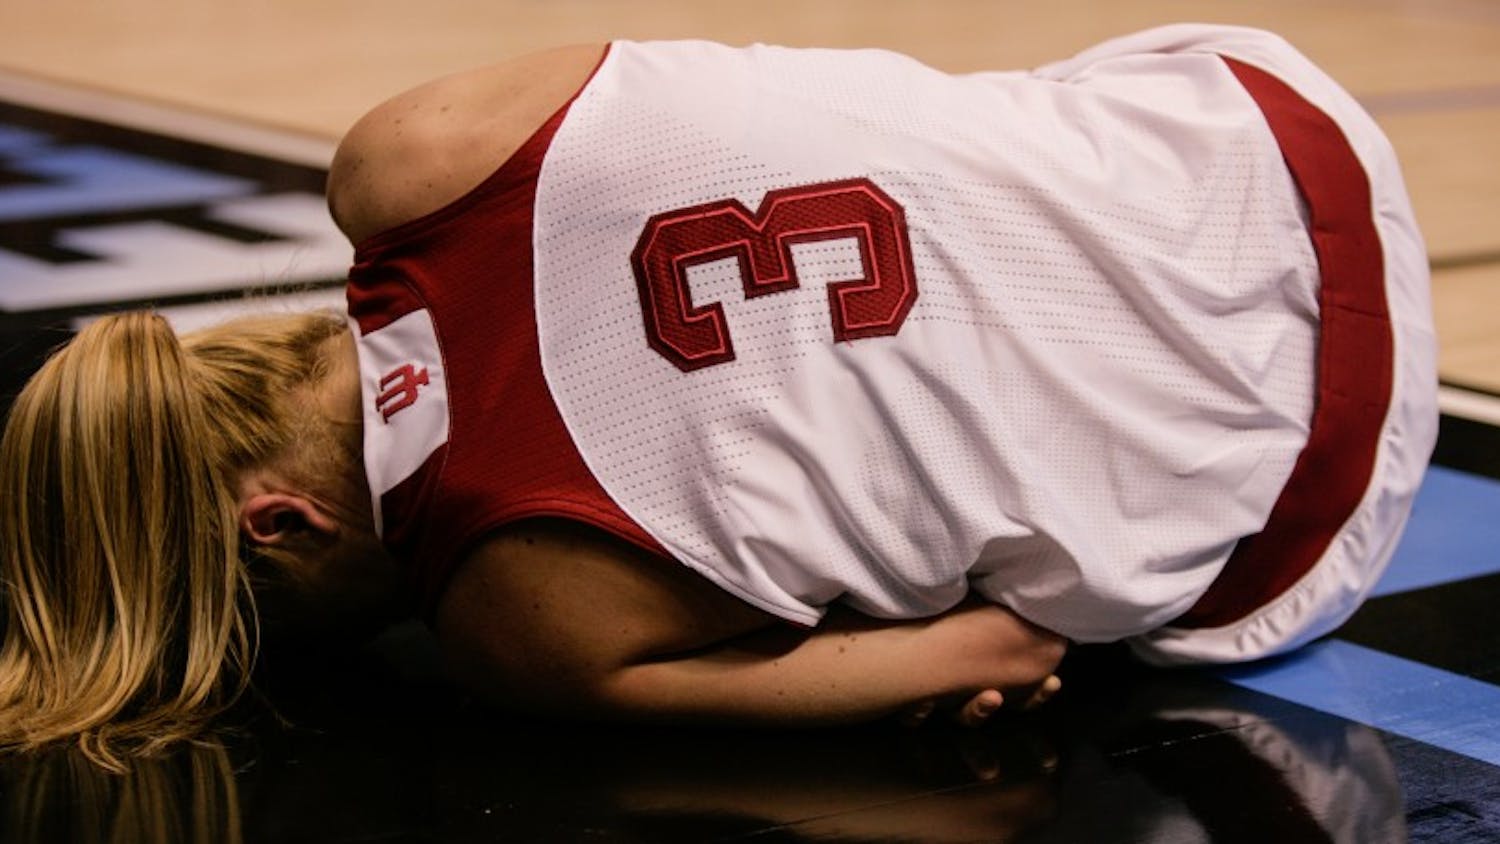 Sophomore guard Tyra Buss lies in pain after falling while attempting a layup. Buss scored 16 points for the Hoosiers, but they fell short and lost to Northwestern 73-79 Friday at Bankers Life Fieldhouse in Indianapolis.